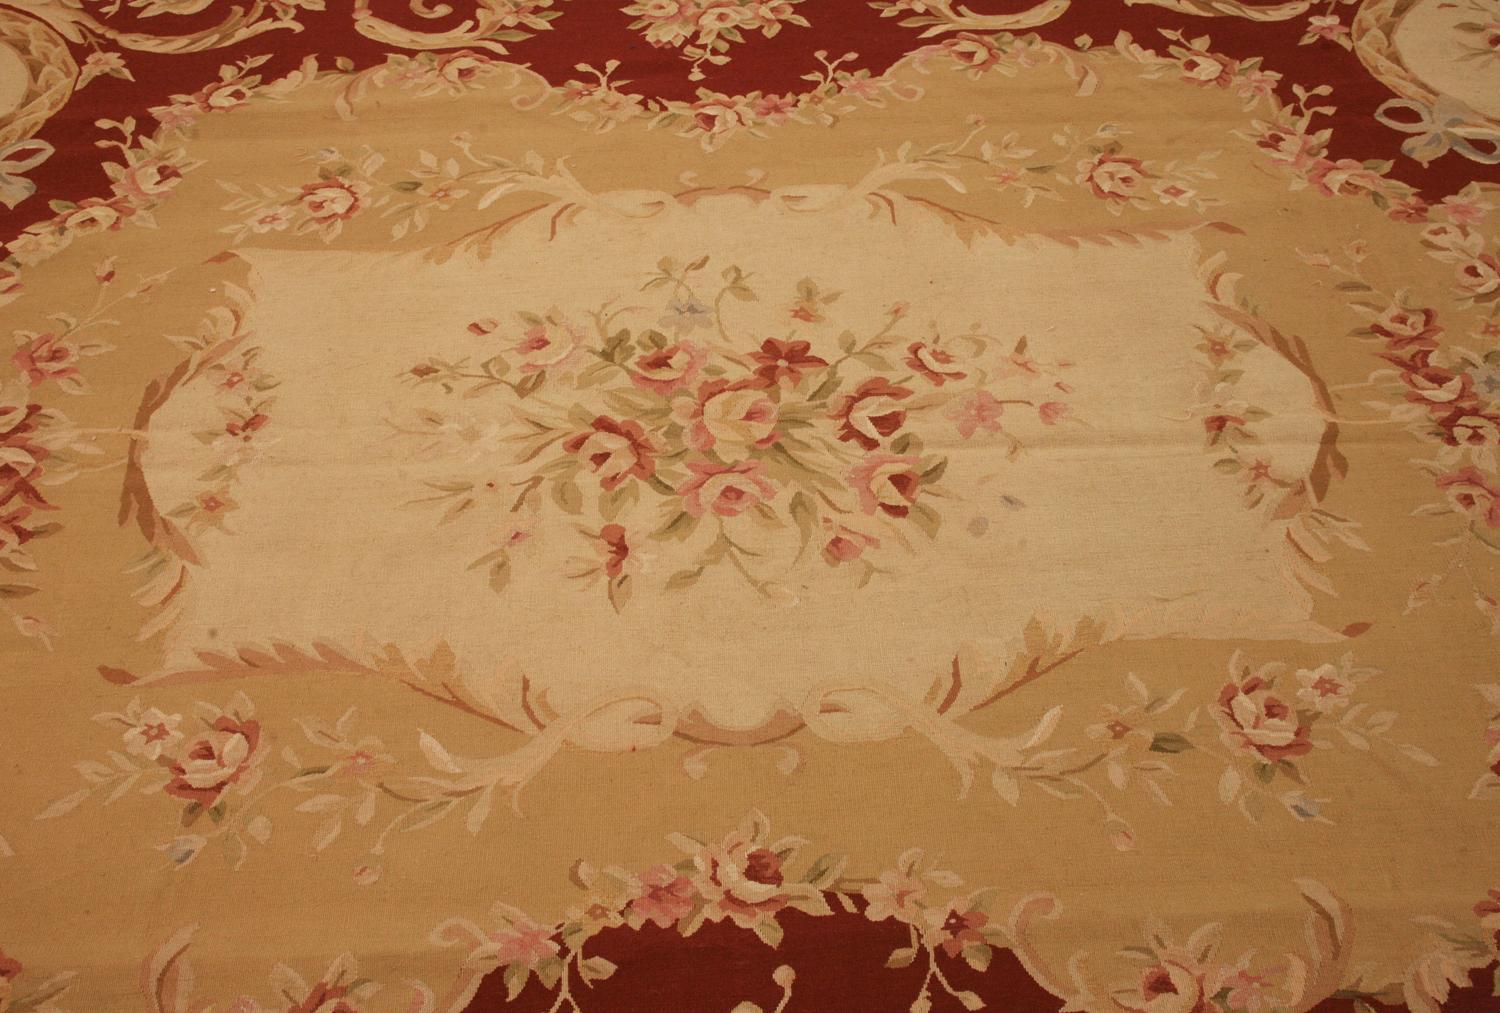 Contemporary Chinese Aubusson Flat-Weave Rug with Medallion and Floral Design, 21st Century